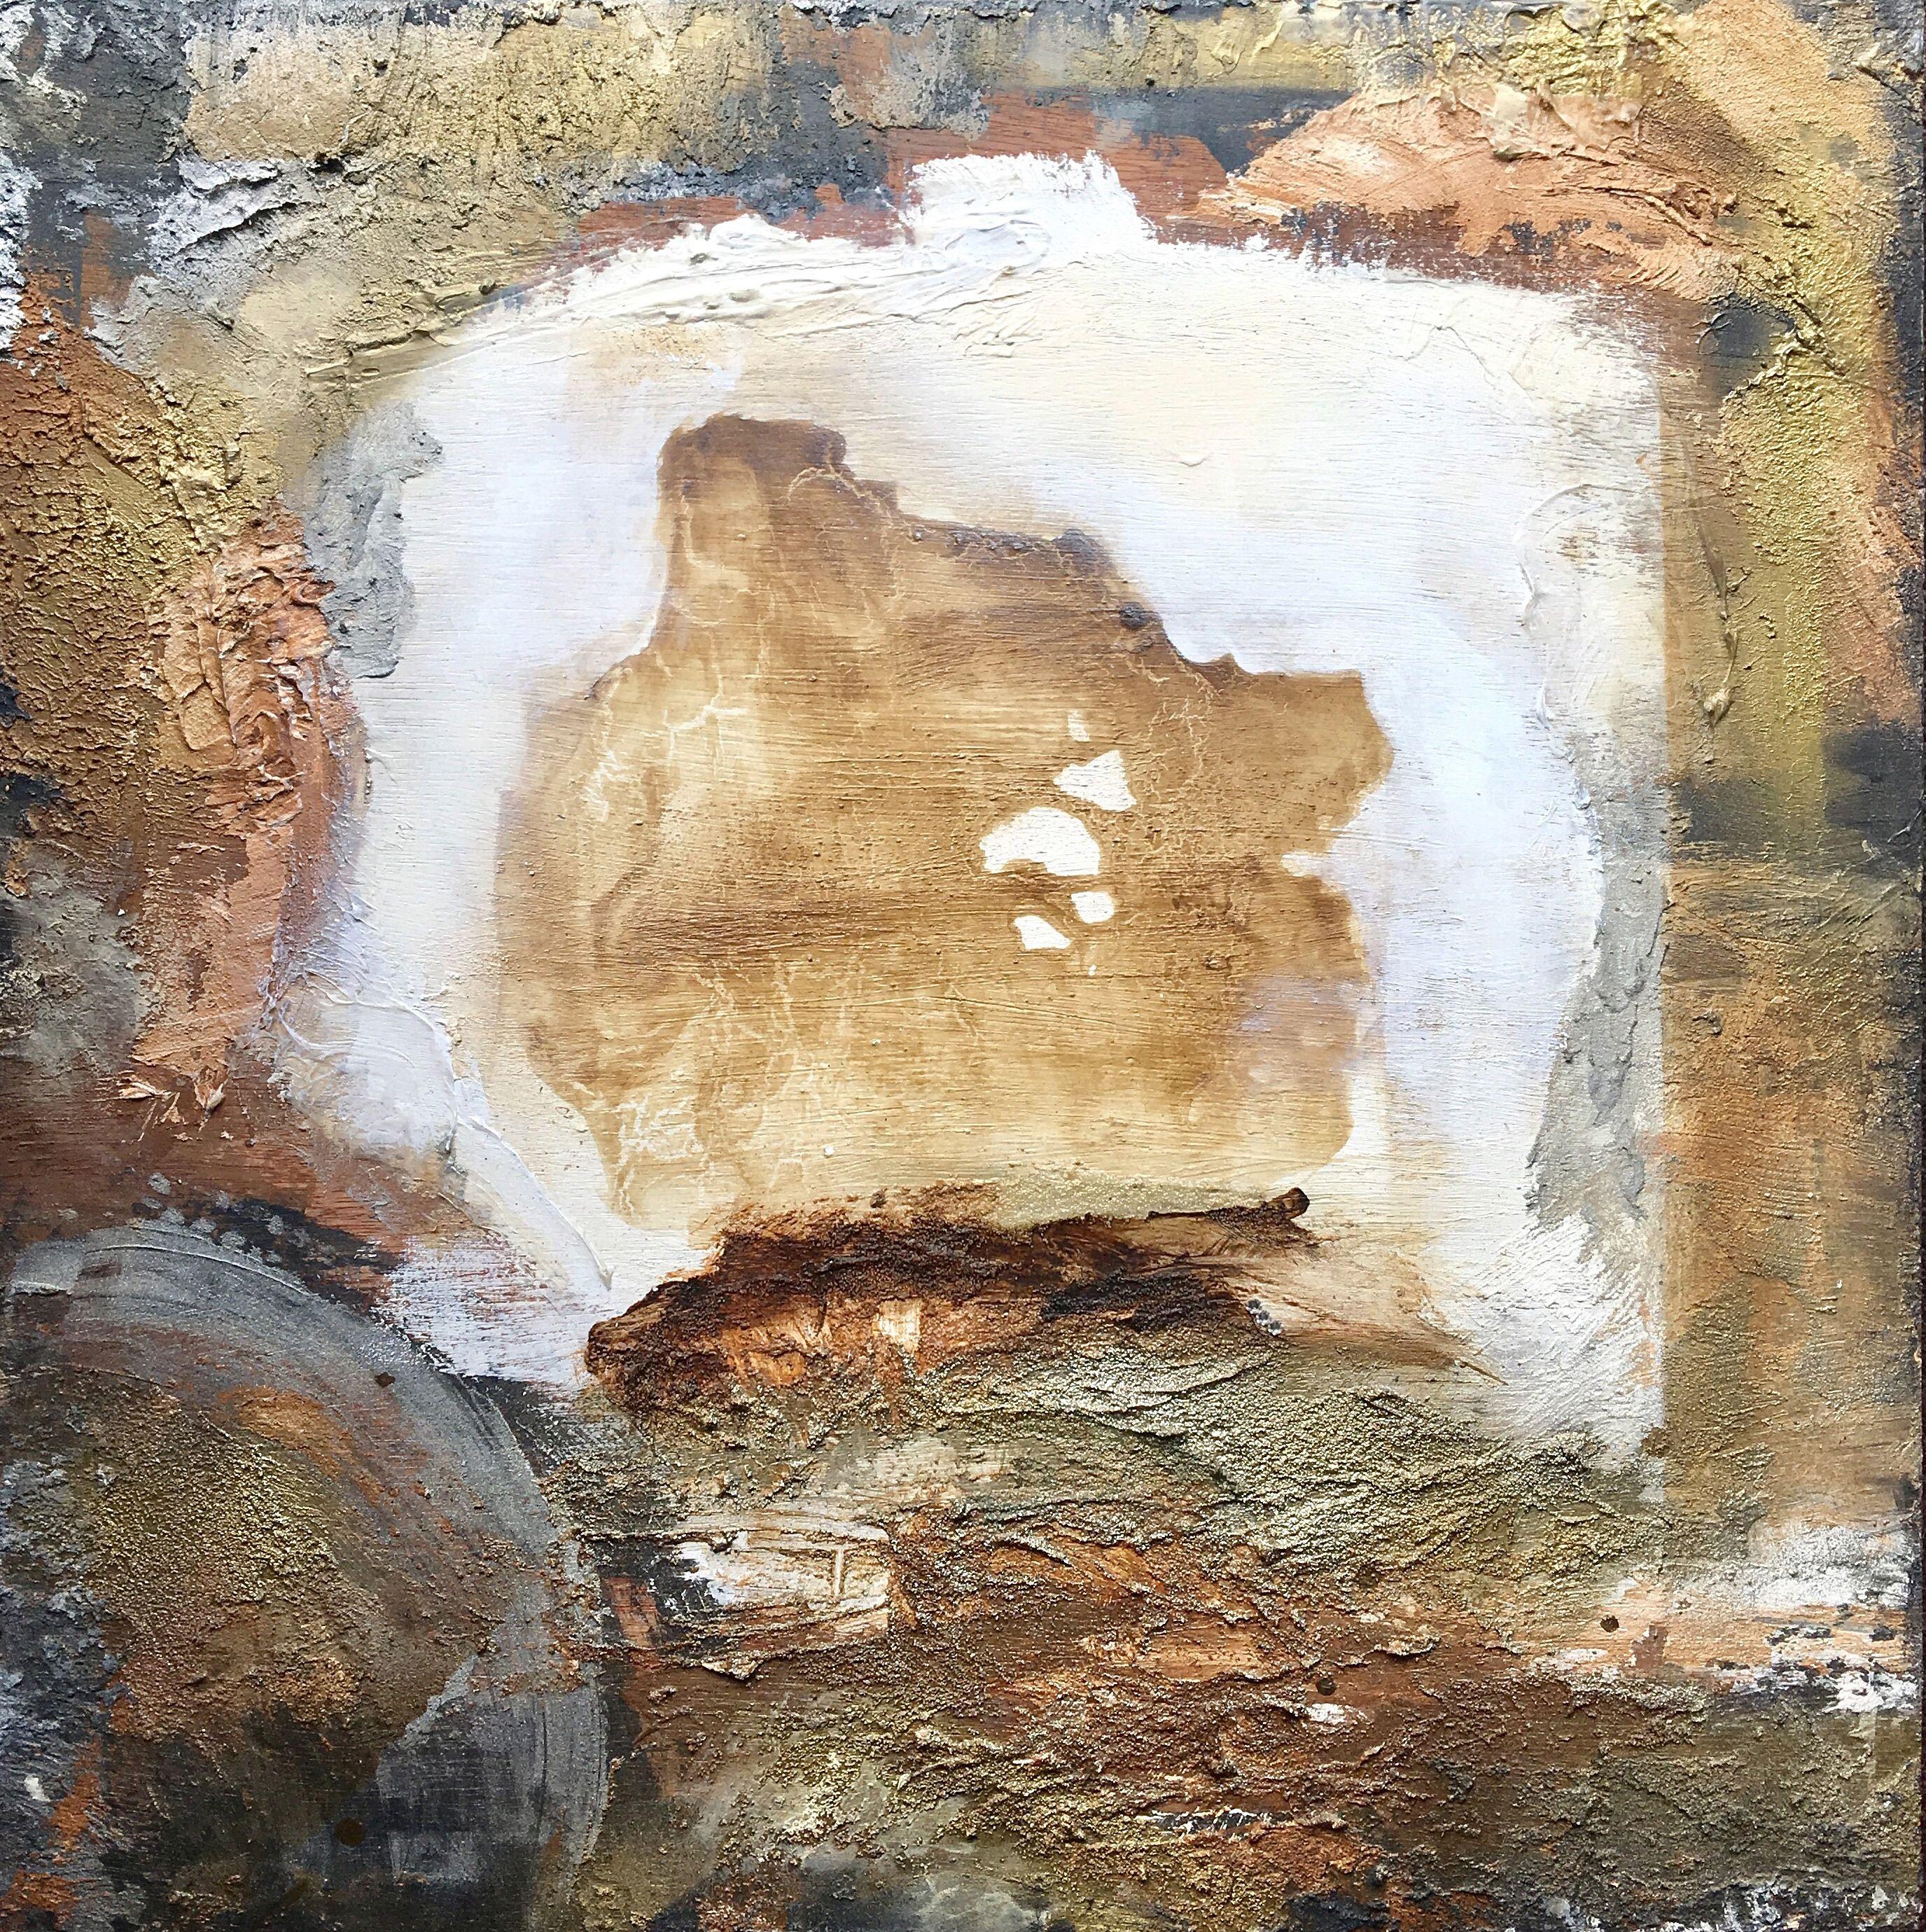 Series Poetic Statement: Portal of Peace. 24" x 24" Eco-Friendly Textured Oil, Acrylic, Metallic Rust,  Champagne, Brass, Gold and Bronze Statement Painting. Portal XI by Michele Morata is a One-of-a-Kind Contemporary Textured Metallic Artwork using